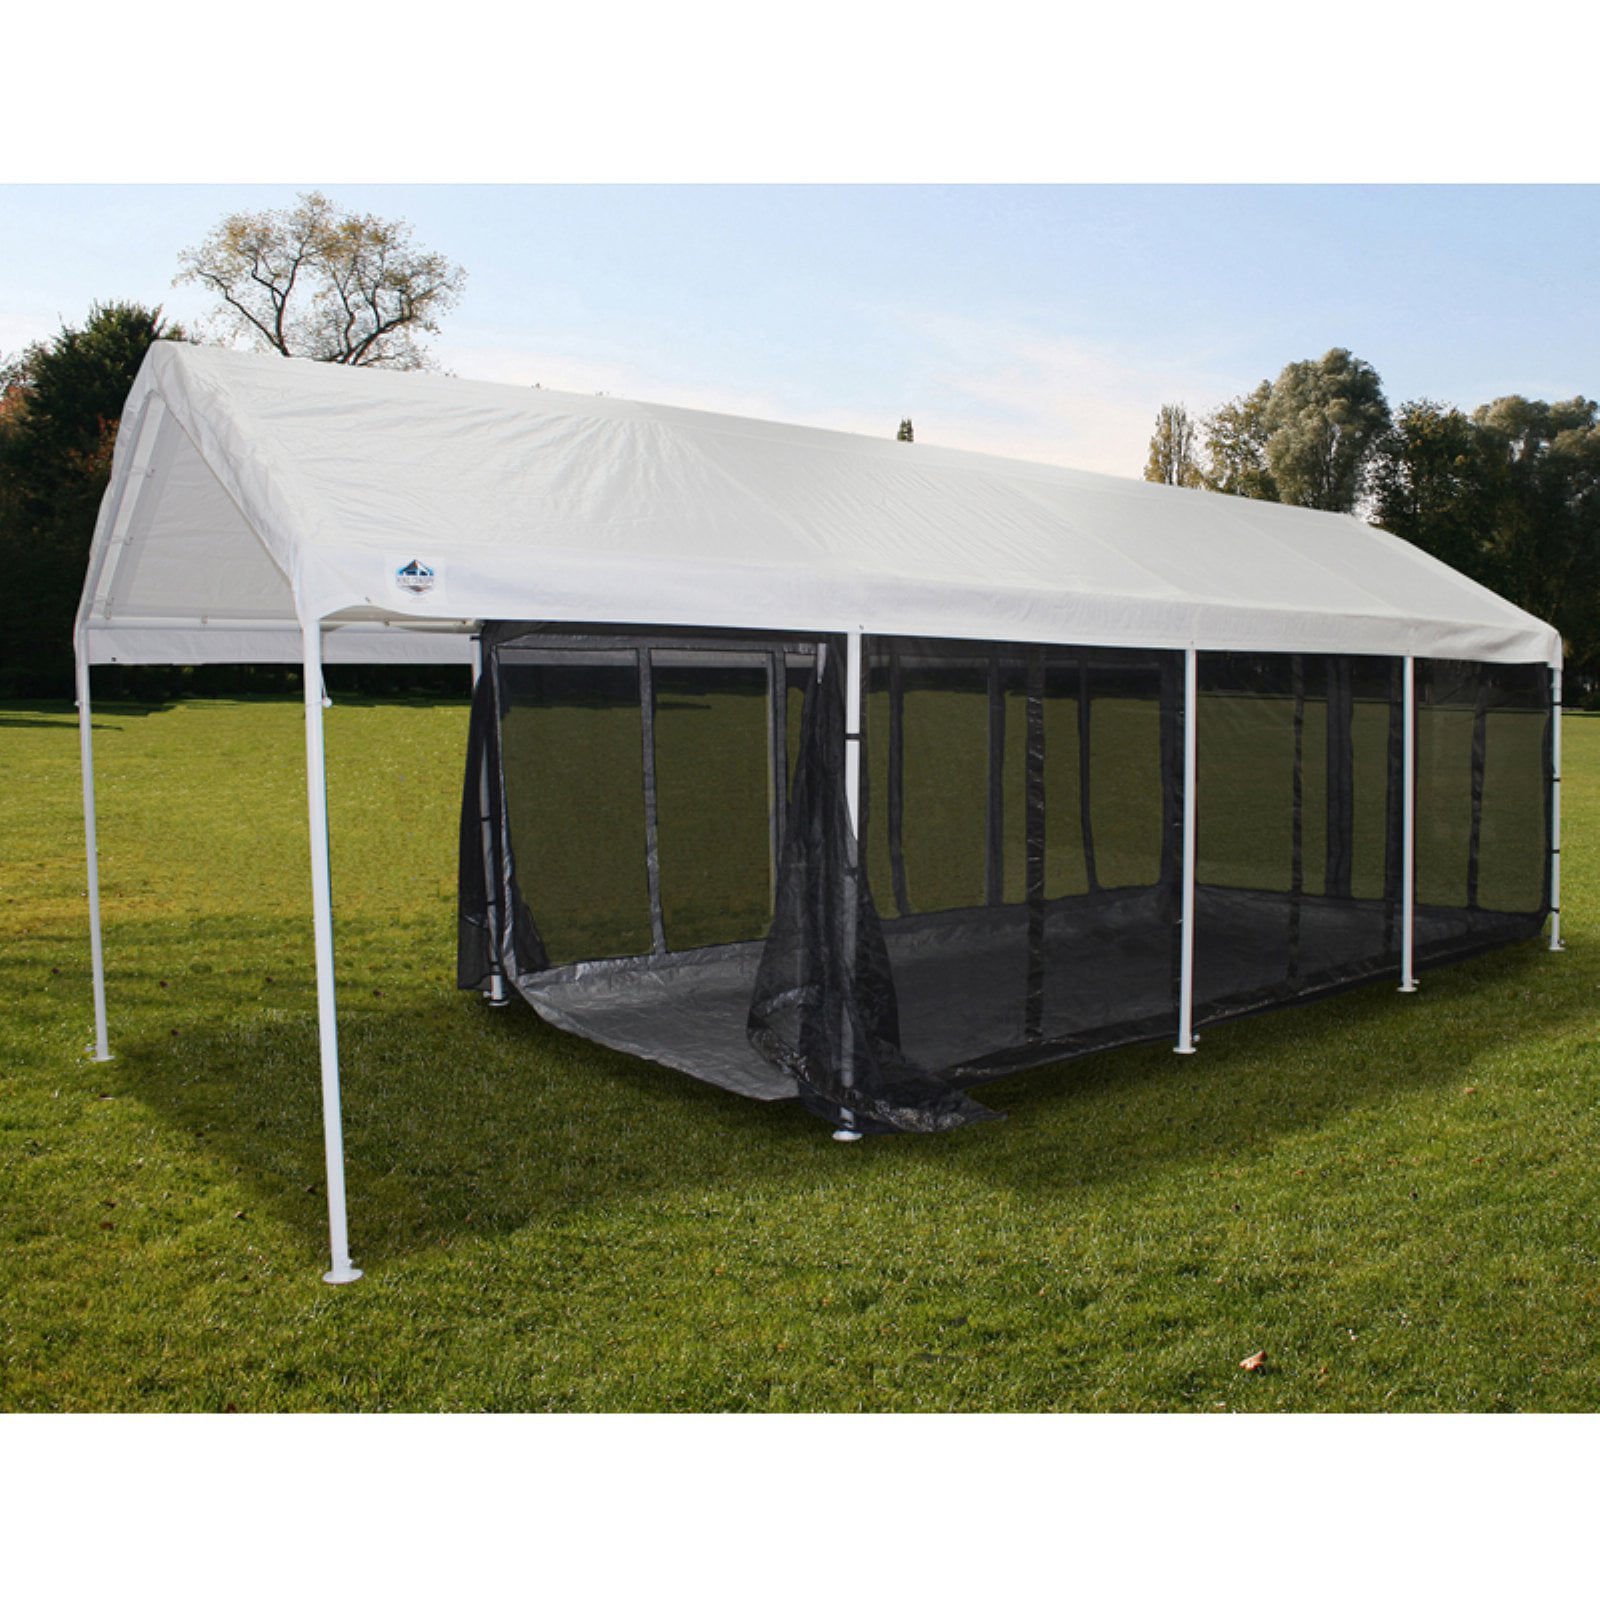 King Canopy 10 X 20 Ft Black Canopy Screen Room With Floor